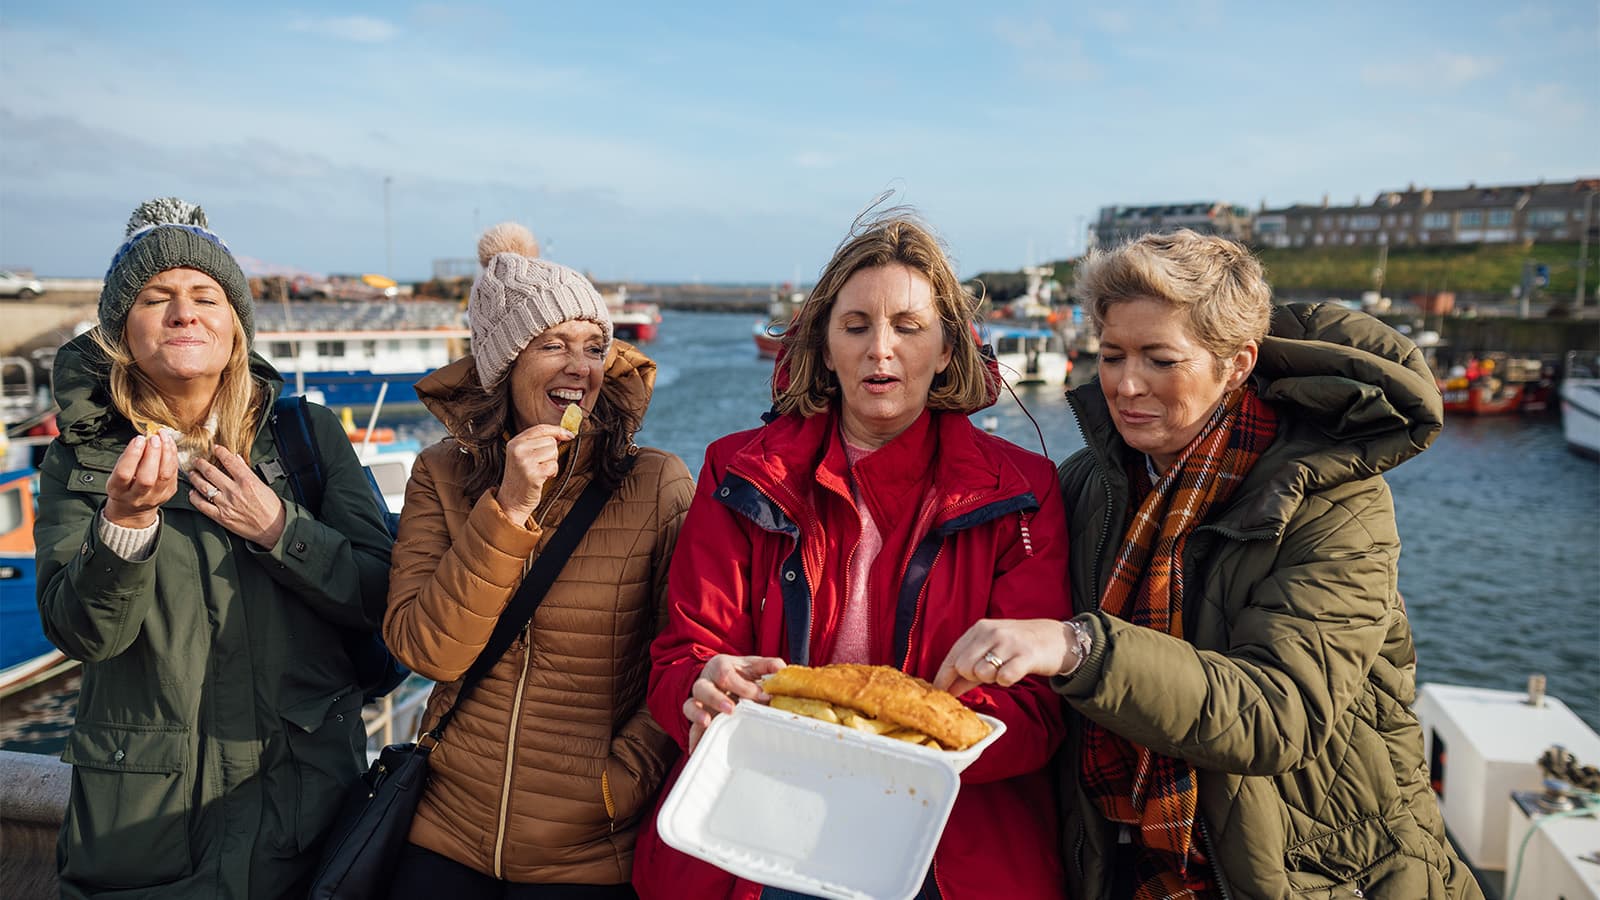 Women at the seaside sharing fish and chips while earing autumnal clothing in the cold